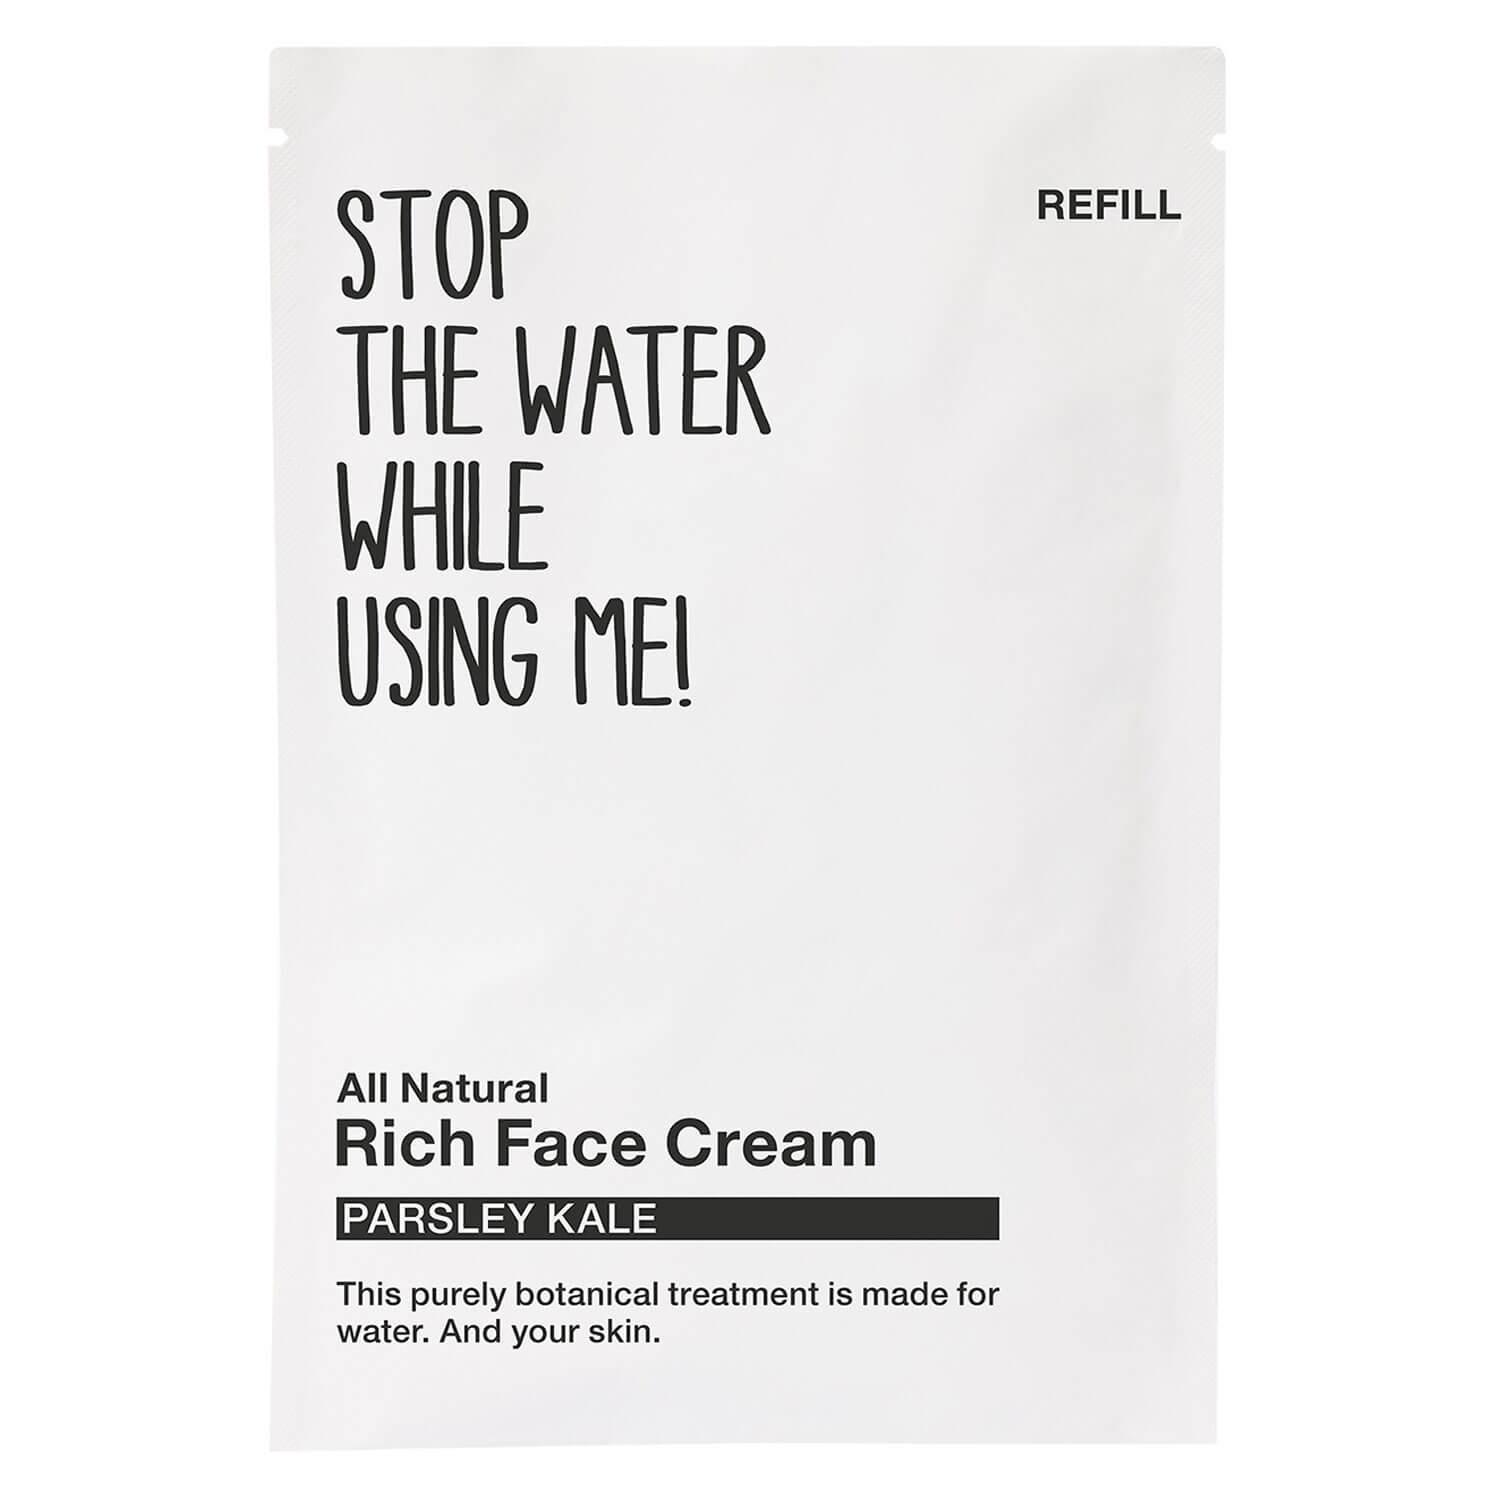 All Natural Face - Refill Rich Face Cream Parsley Kale